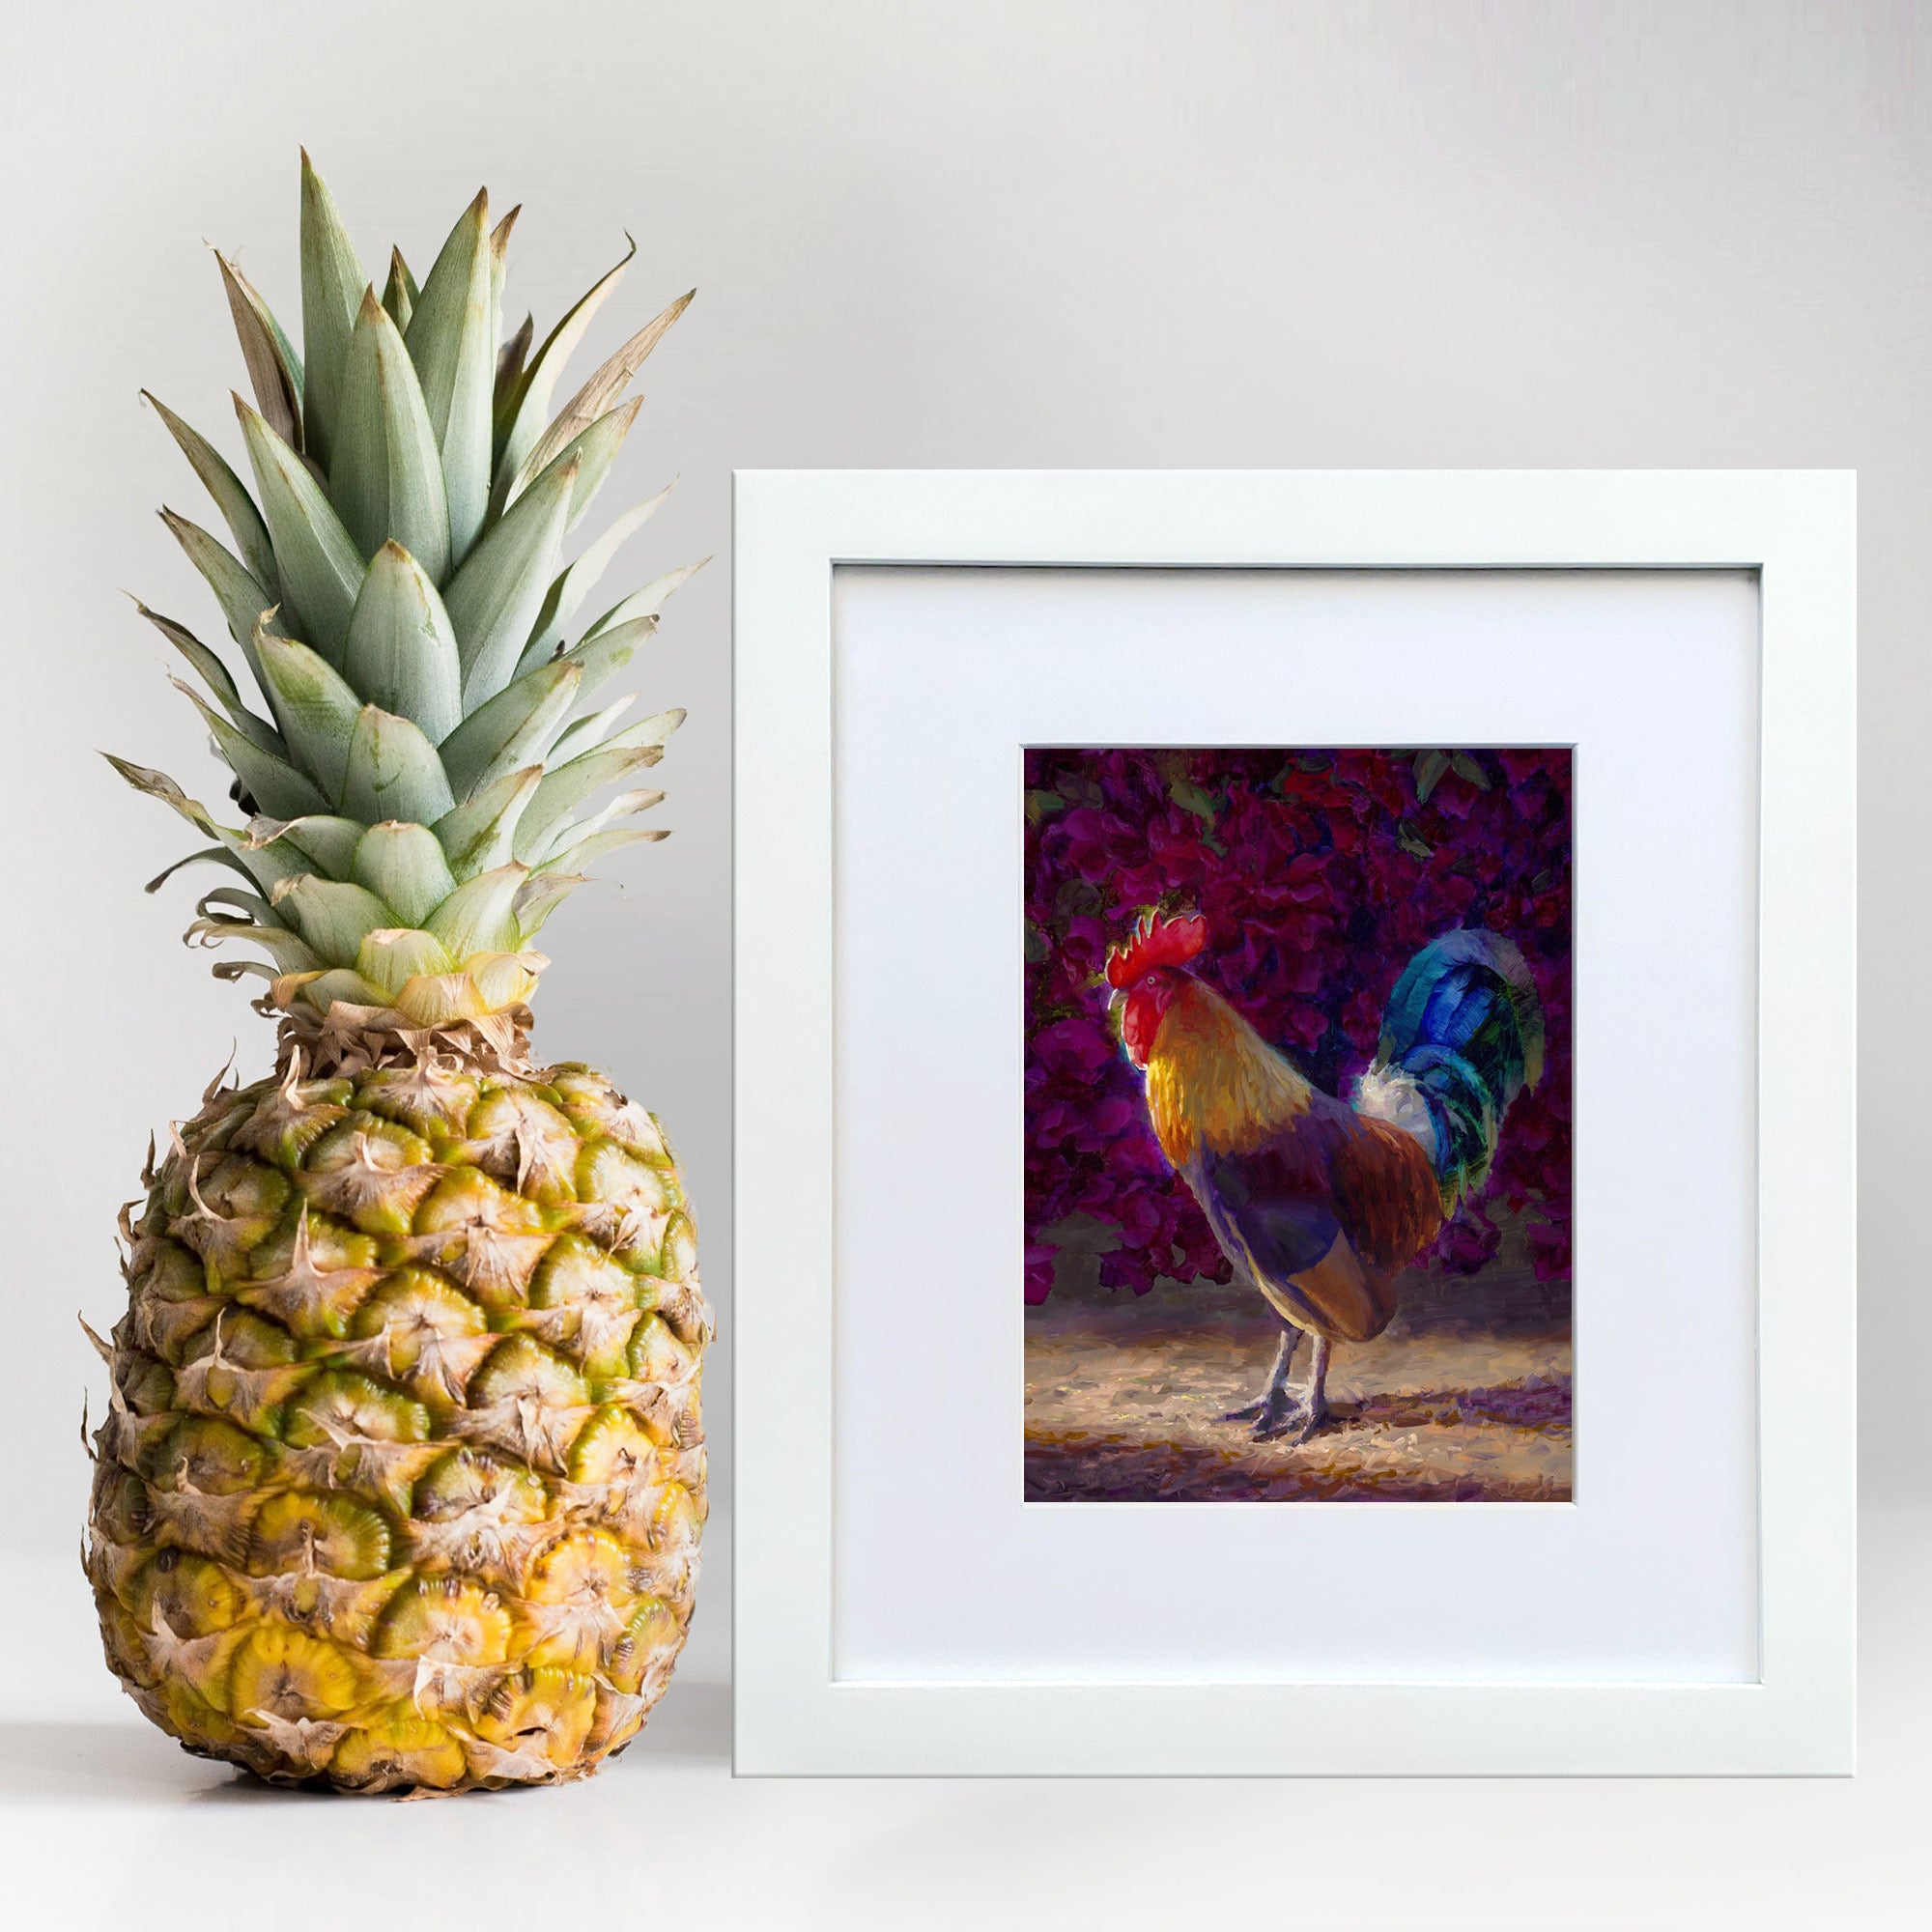 Rooster decor art print of a painting depicting a male chicken in front of a flowering pink bush. The wall art is framed in a white wood frame and standing in next to a pineapple.